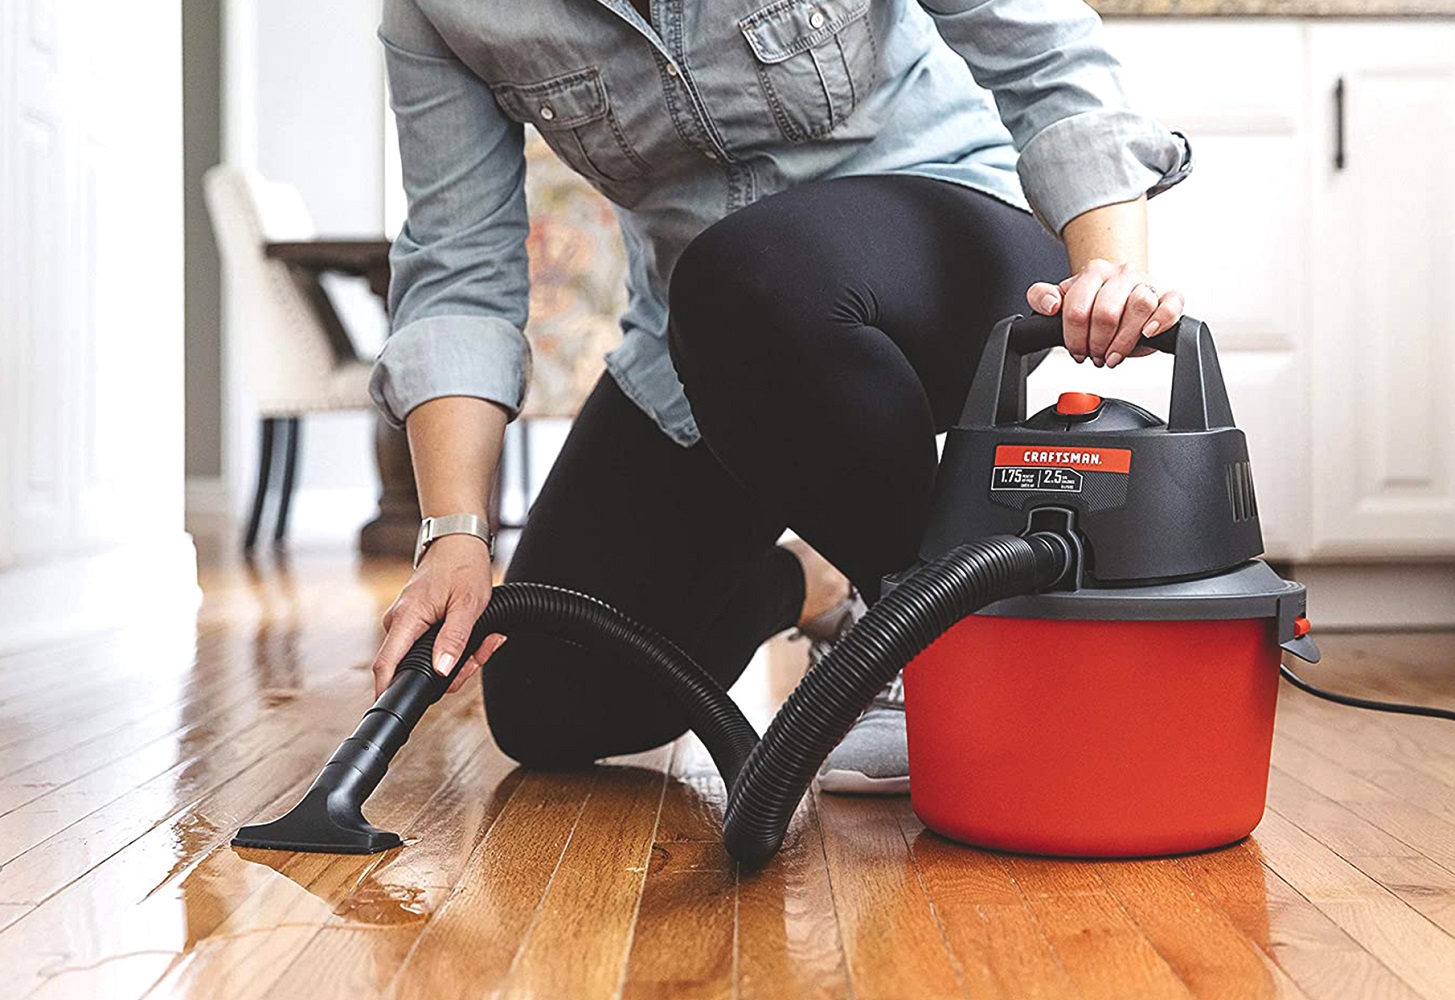 4 Best Wet/Dry Vacuums for January 2022 | Check Reviews